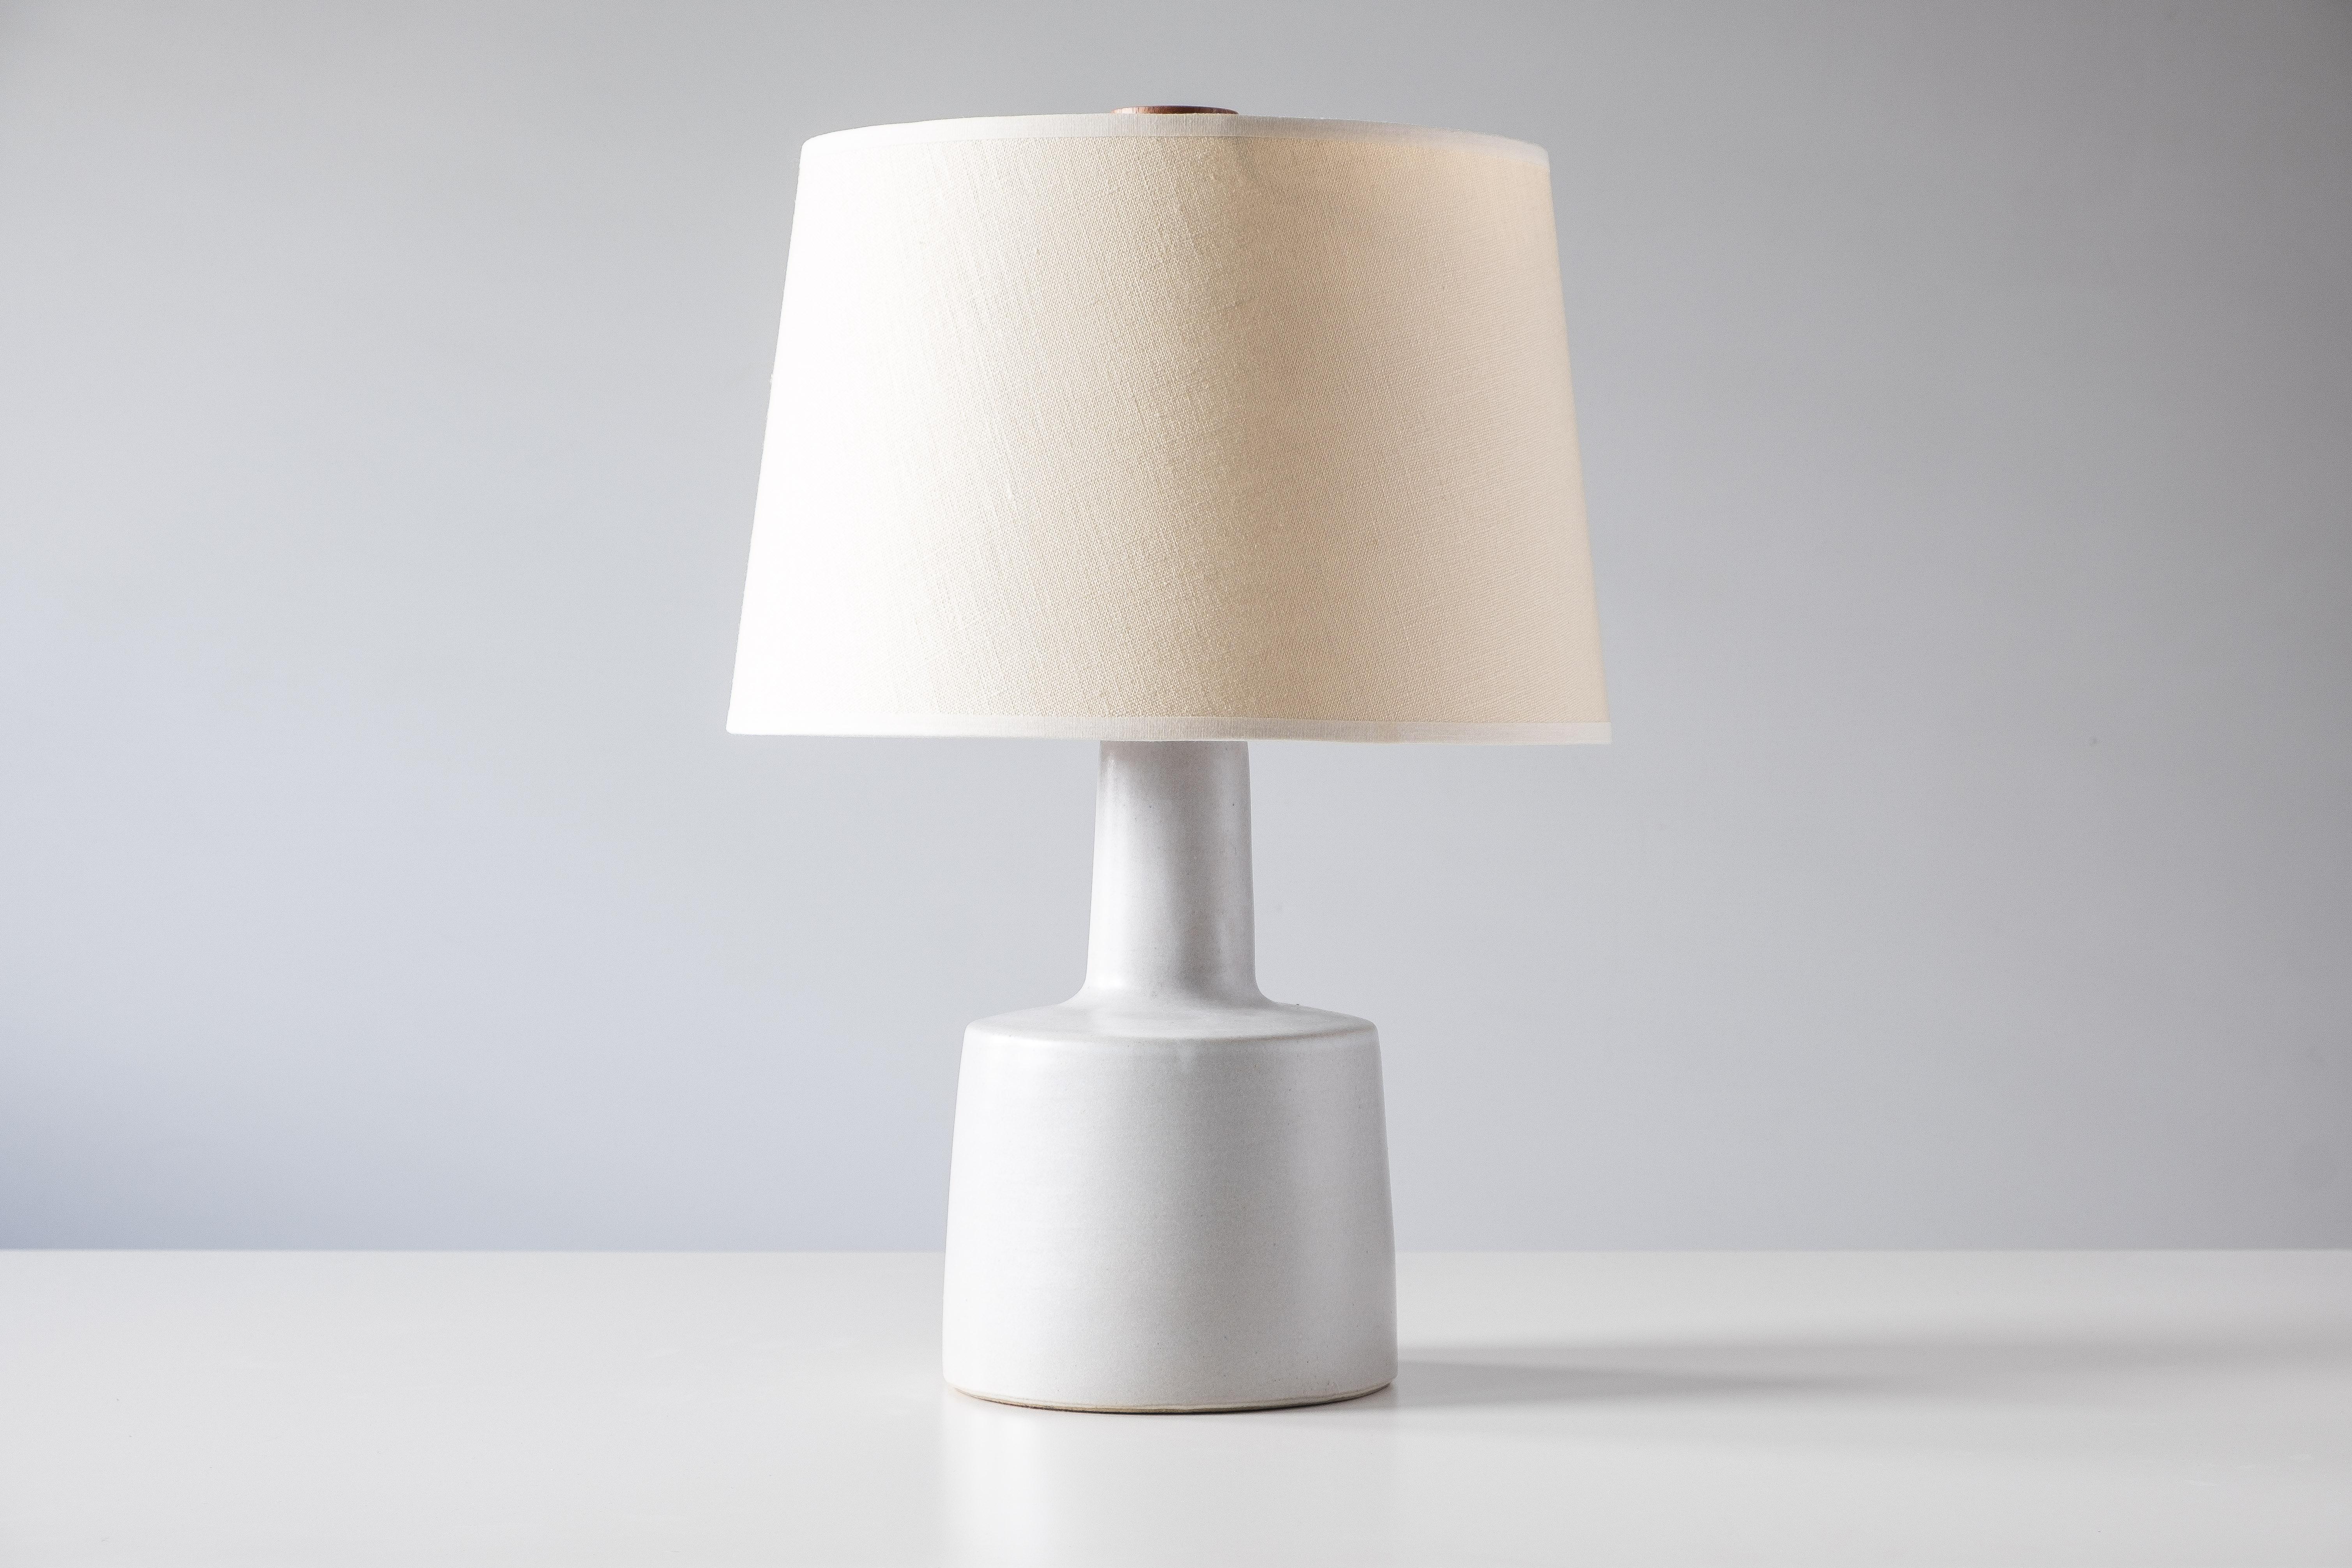 What is it?
—
Another gem from the masters of mid century lightning – Gordon and Jane Martz.

This signed Martz model 105 lamp comes in a semi-gloss white glaze with small flecks of red and blue. The lamp shows a small bit of texture from the clay